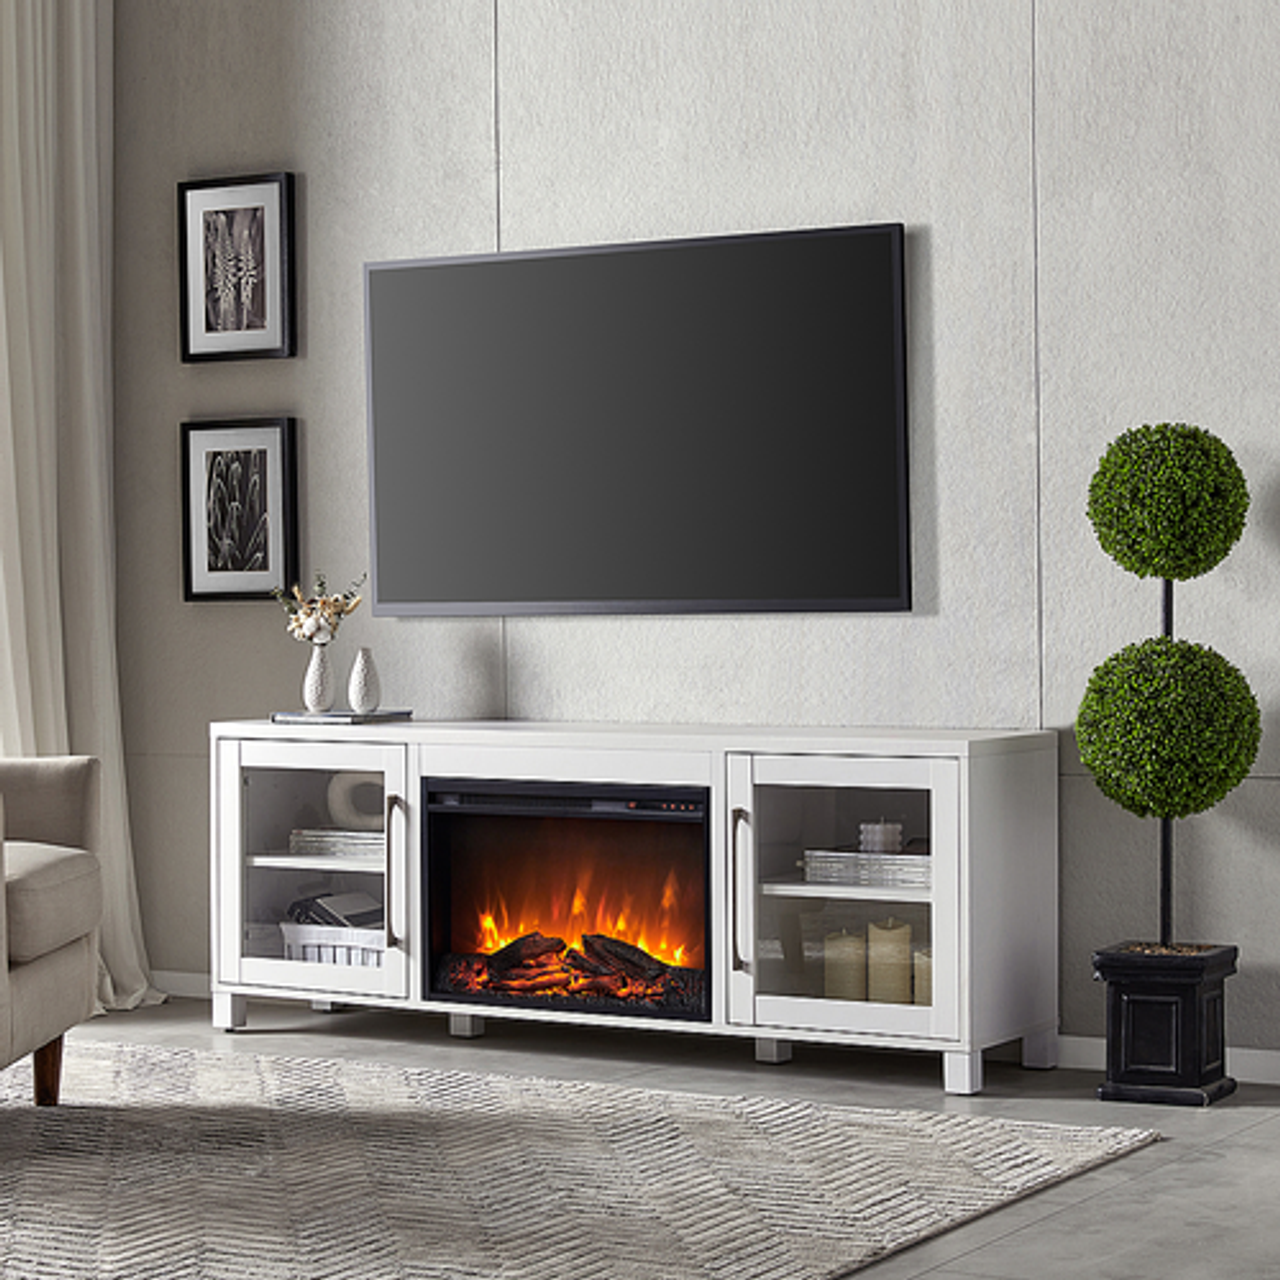 Camden&Wells - Quincy Log Fireplace TV Stand for TVs up to 80" - White